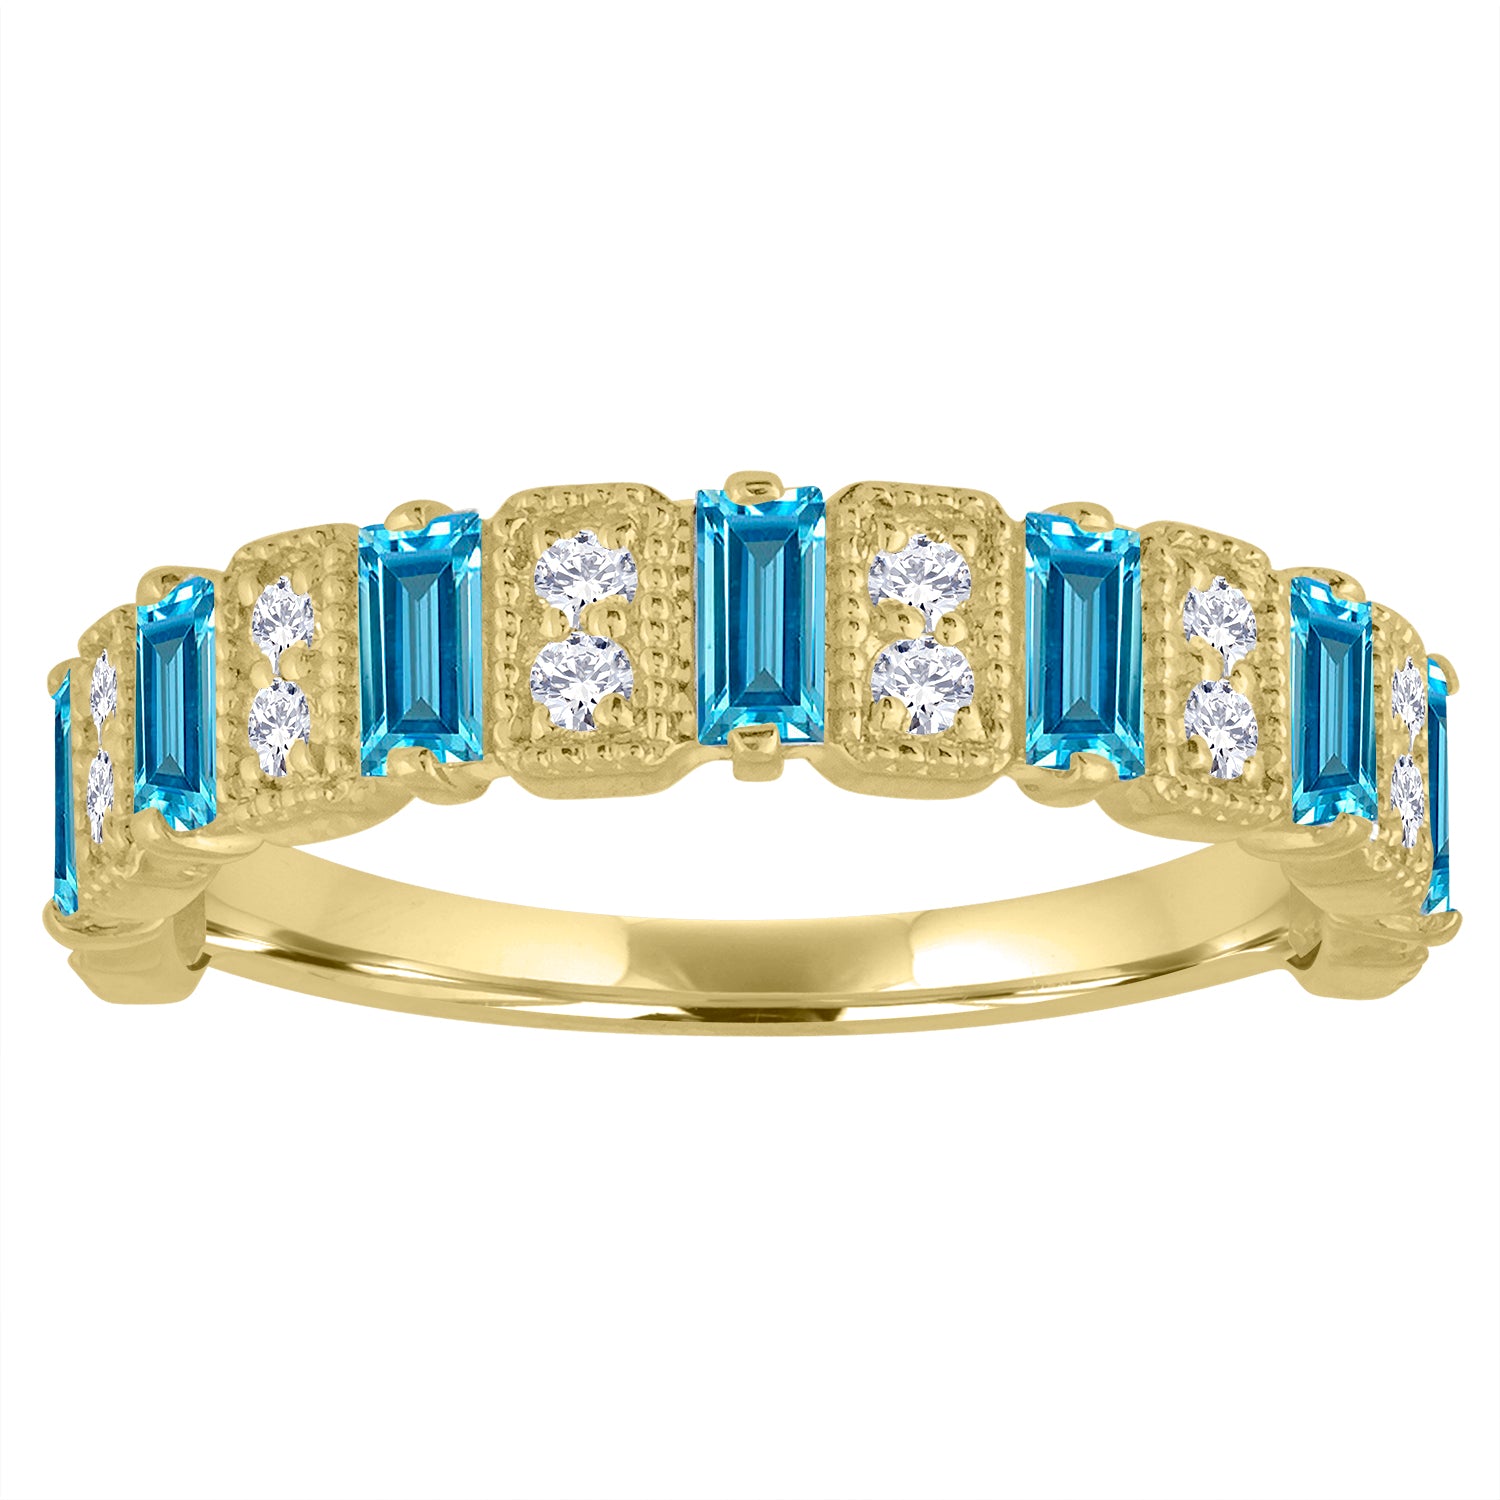 Yellow gold wide band with blue topaz baguettes and round diamonds.